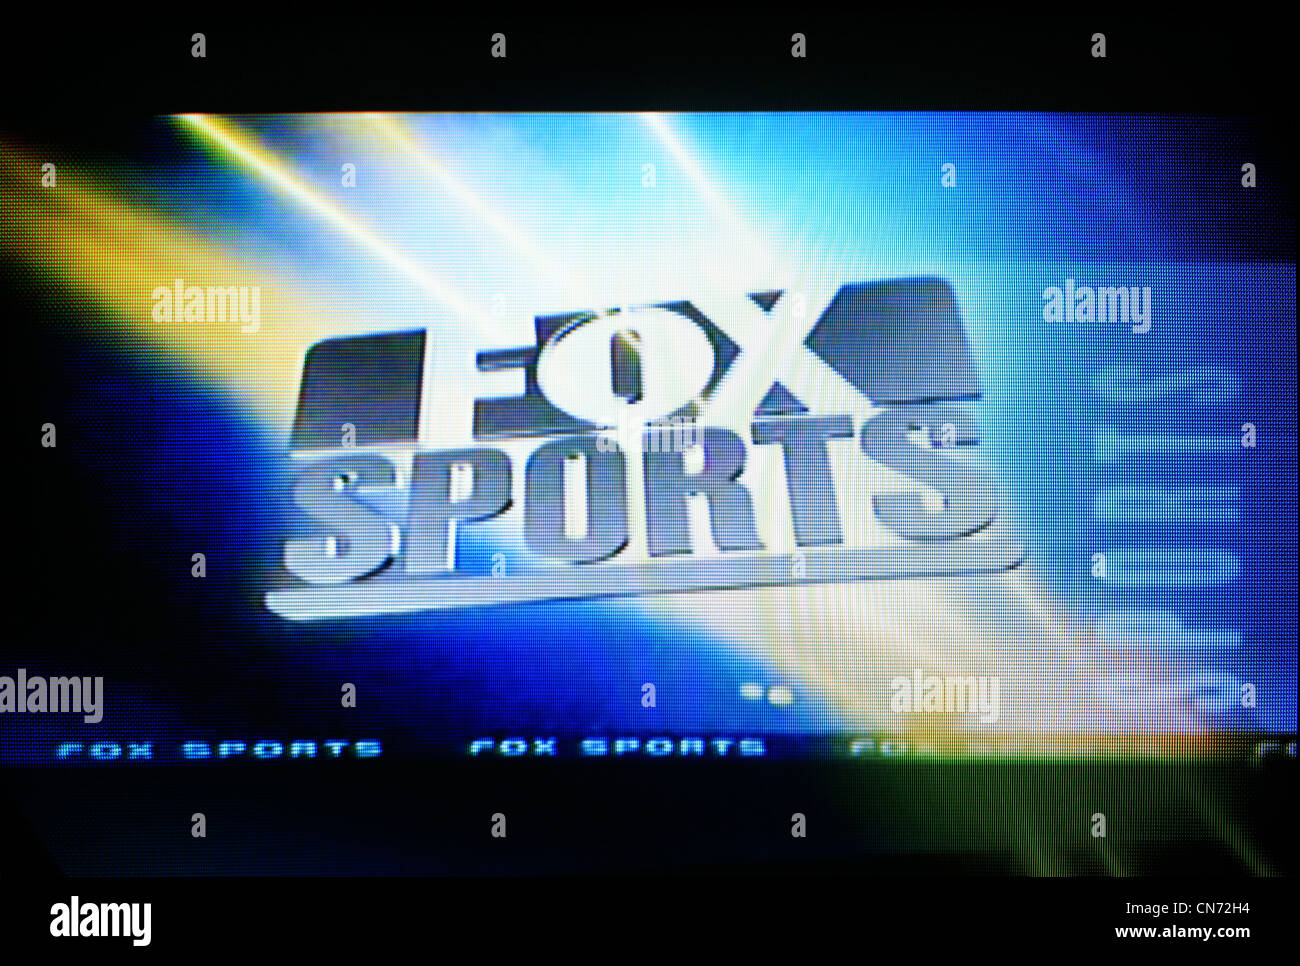 Fox sports hi-res stock photography and images